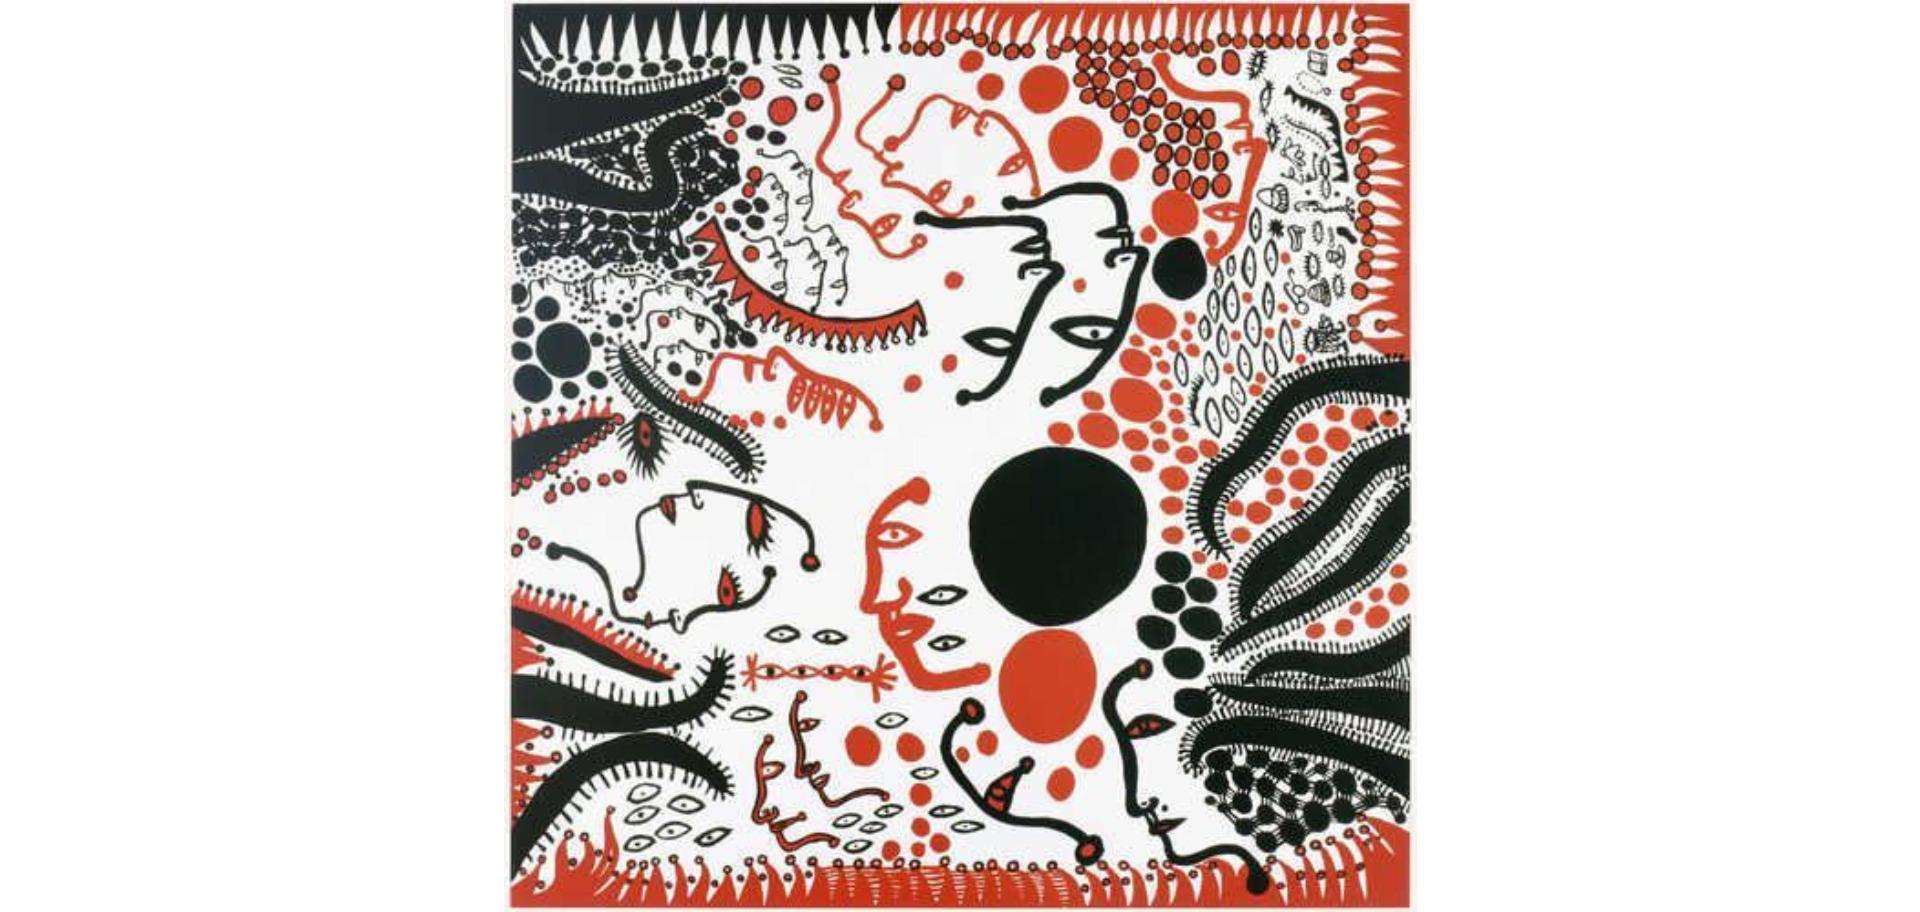 I Want To Sing My Heart Out In Praise of Life, Yayoi Kusama im Angebot 3